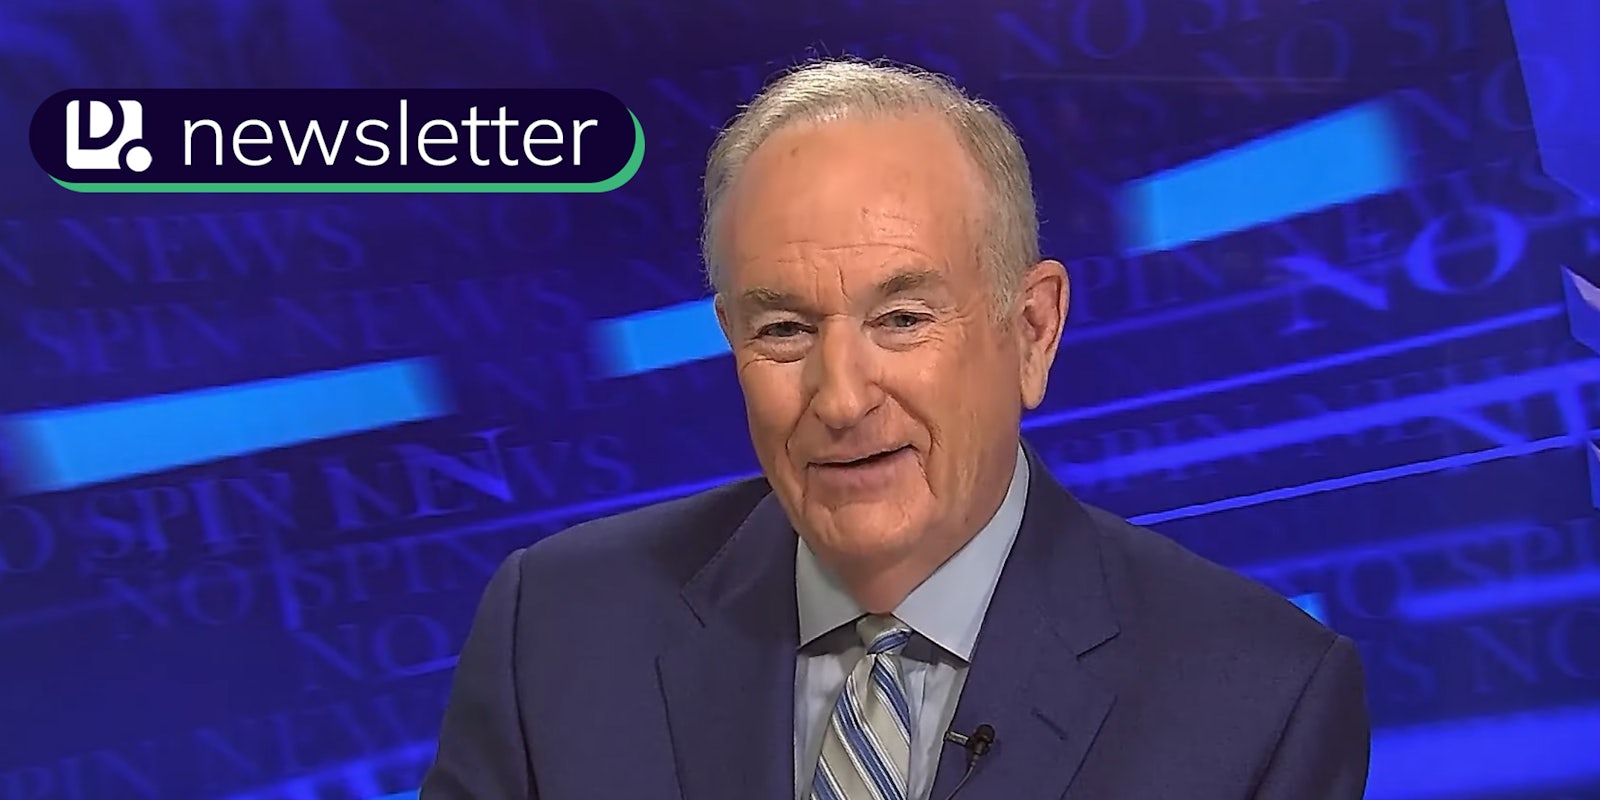 Bill O'Reilly speaking on his show. In the top left corner is the Daily Dot newsletter image.